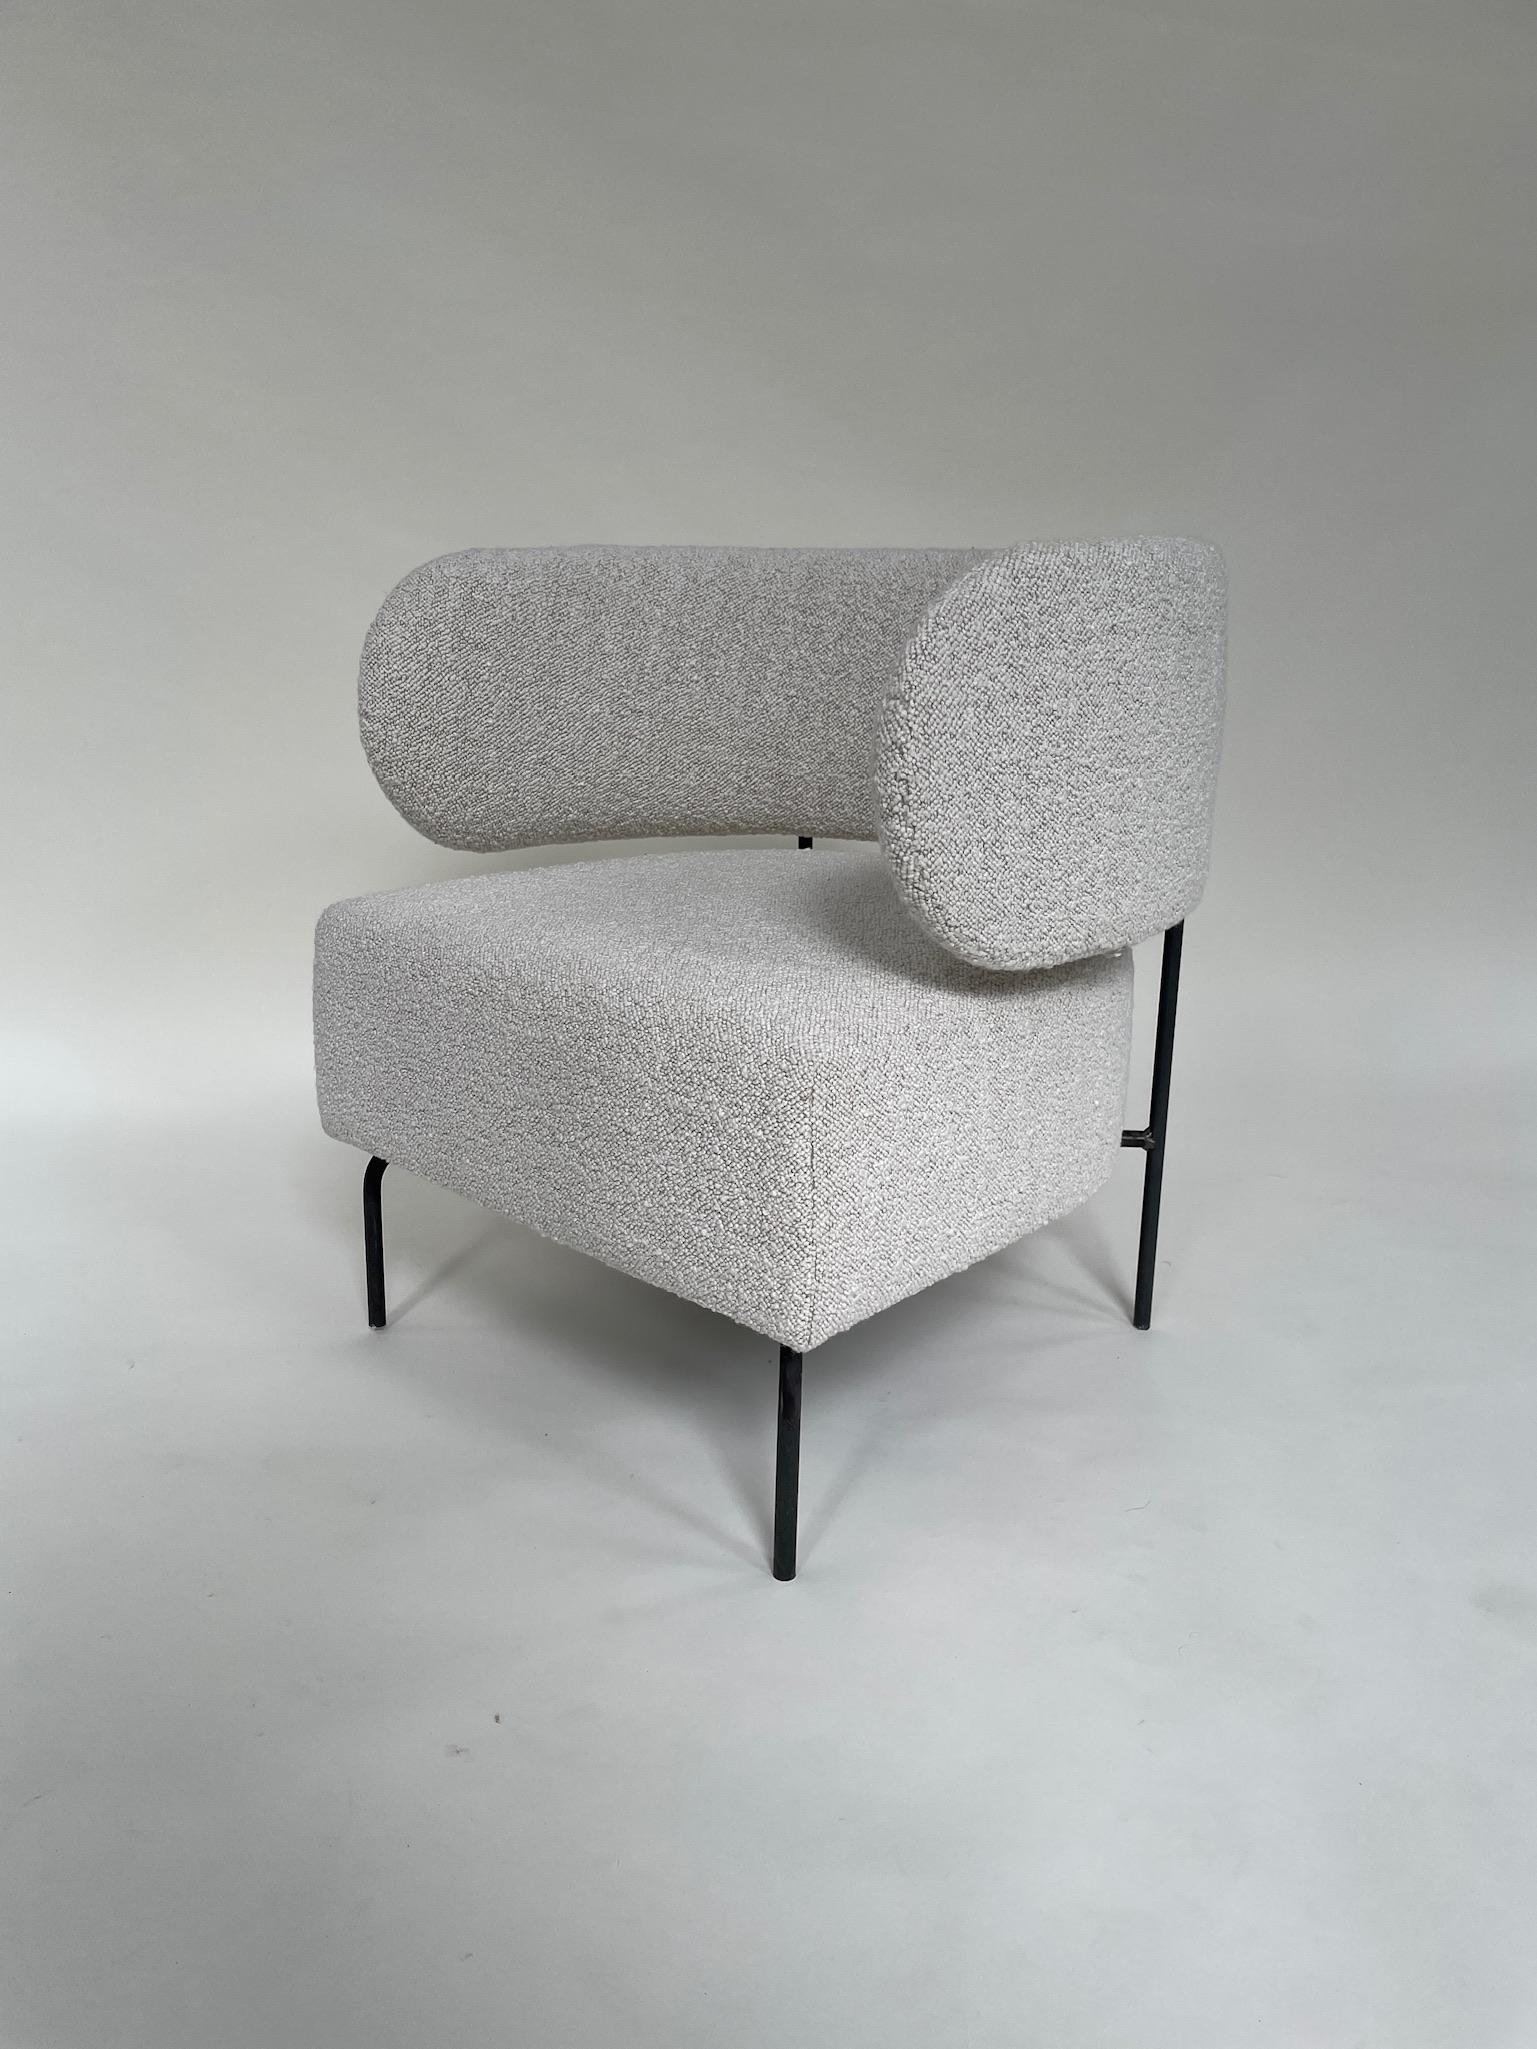 Hug armchair by Fred Rigby Studio.
Dimensions: L 74 x W 70 x H 70 cm.
Materials: steel, bouclé.

Following the curved lines of our Signature collection, the piece was designed to balance soft texture with a structured form. Inviting touch, the